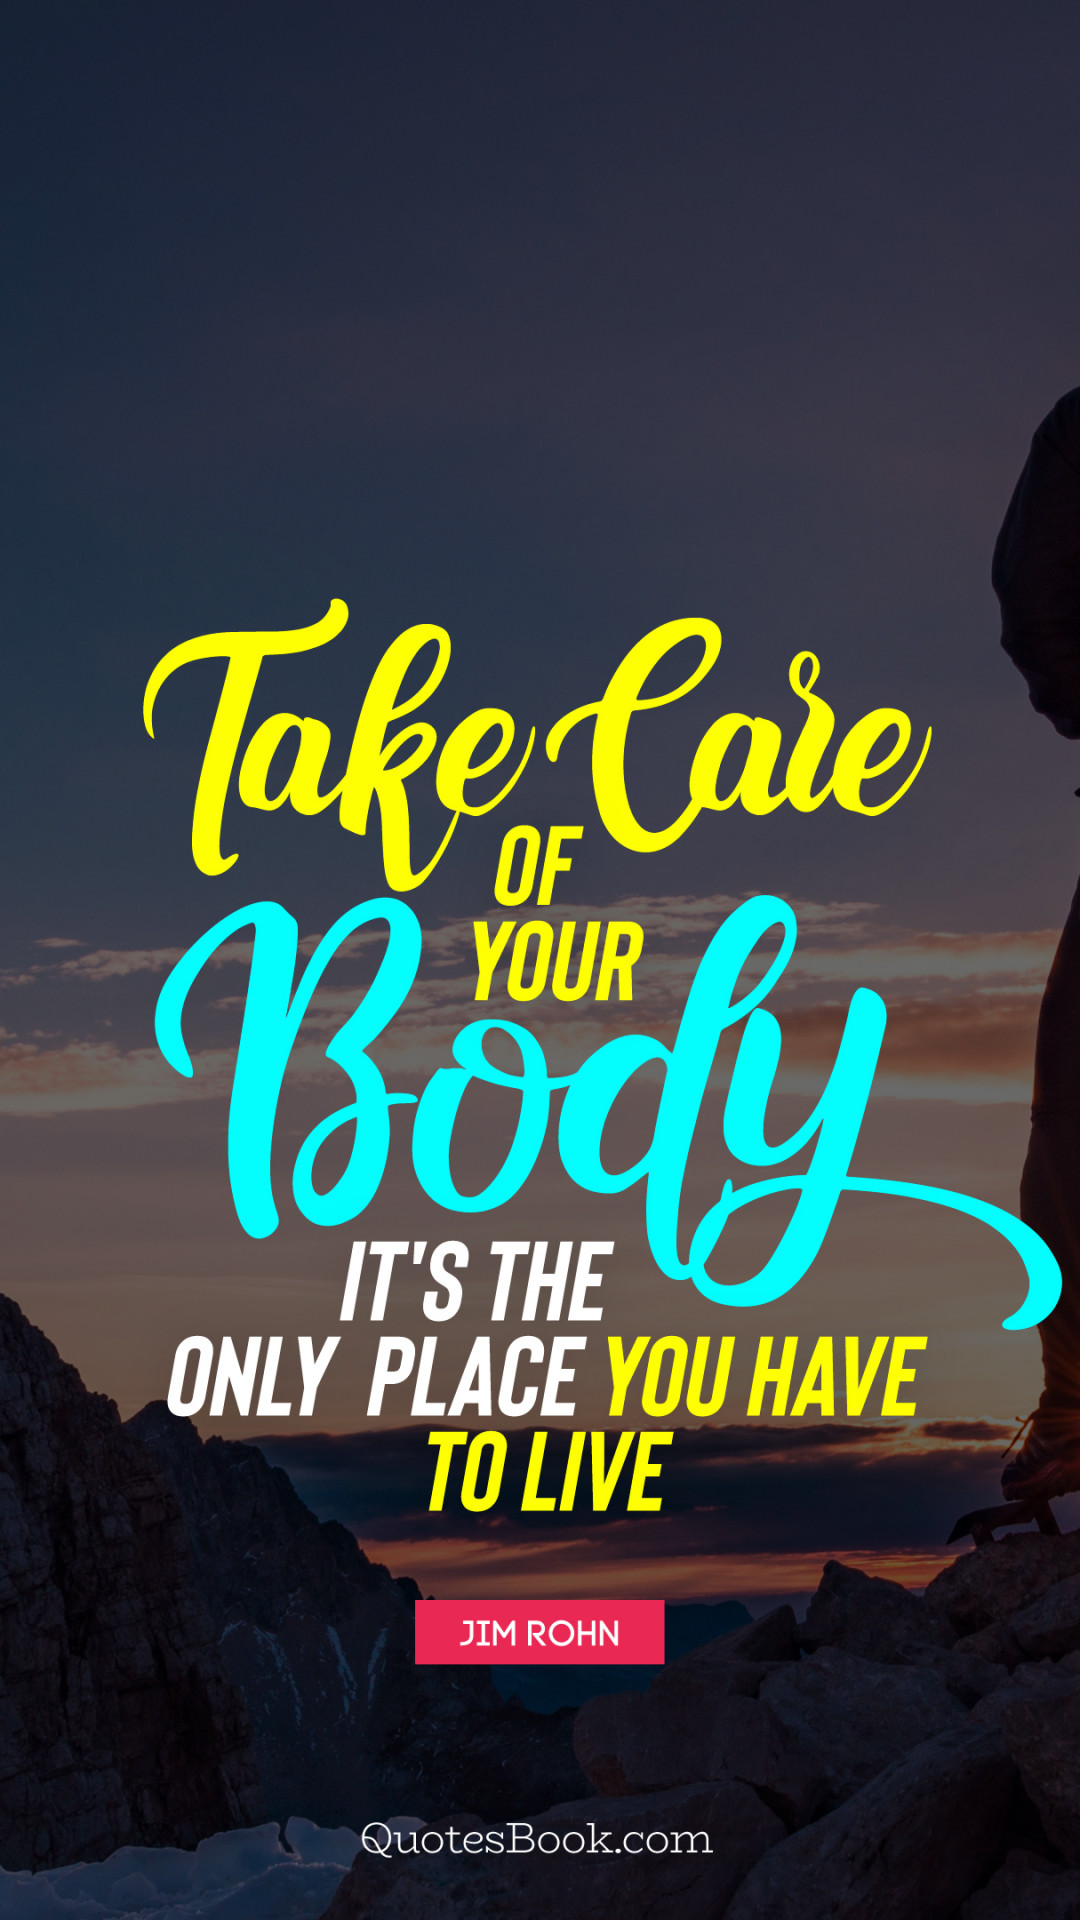 Take care of your body. It's the only place you have to live. - Quote